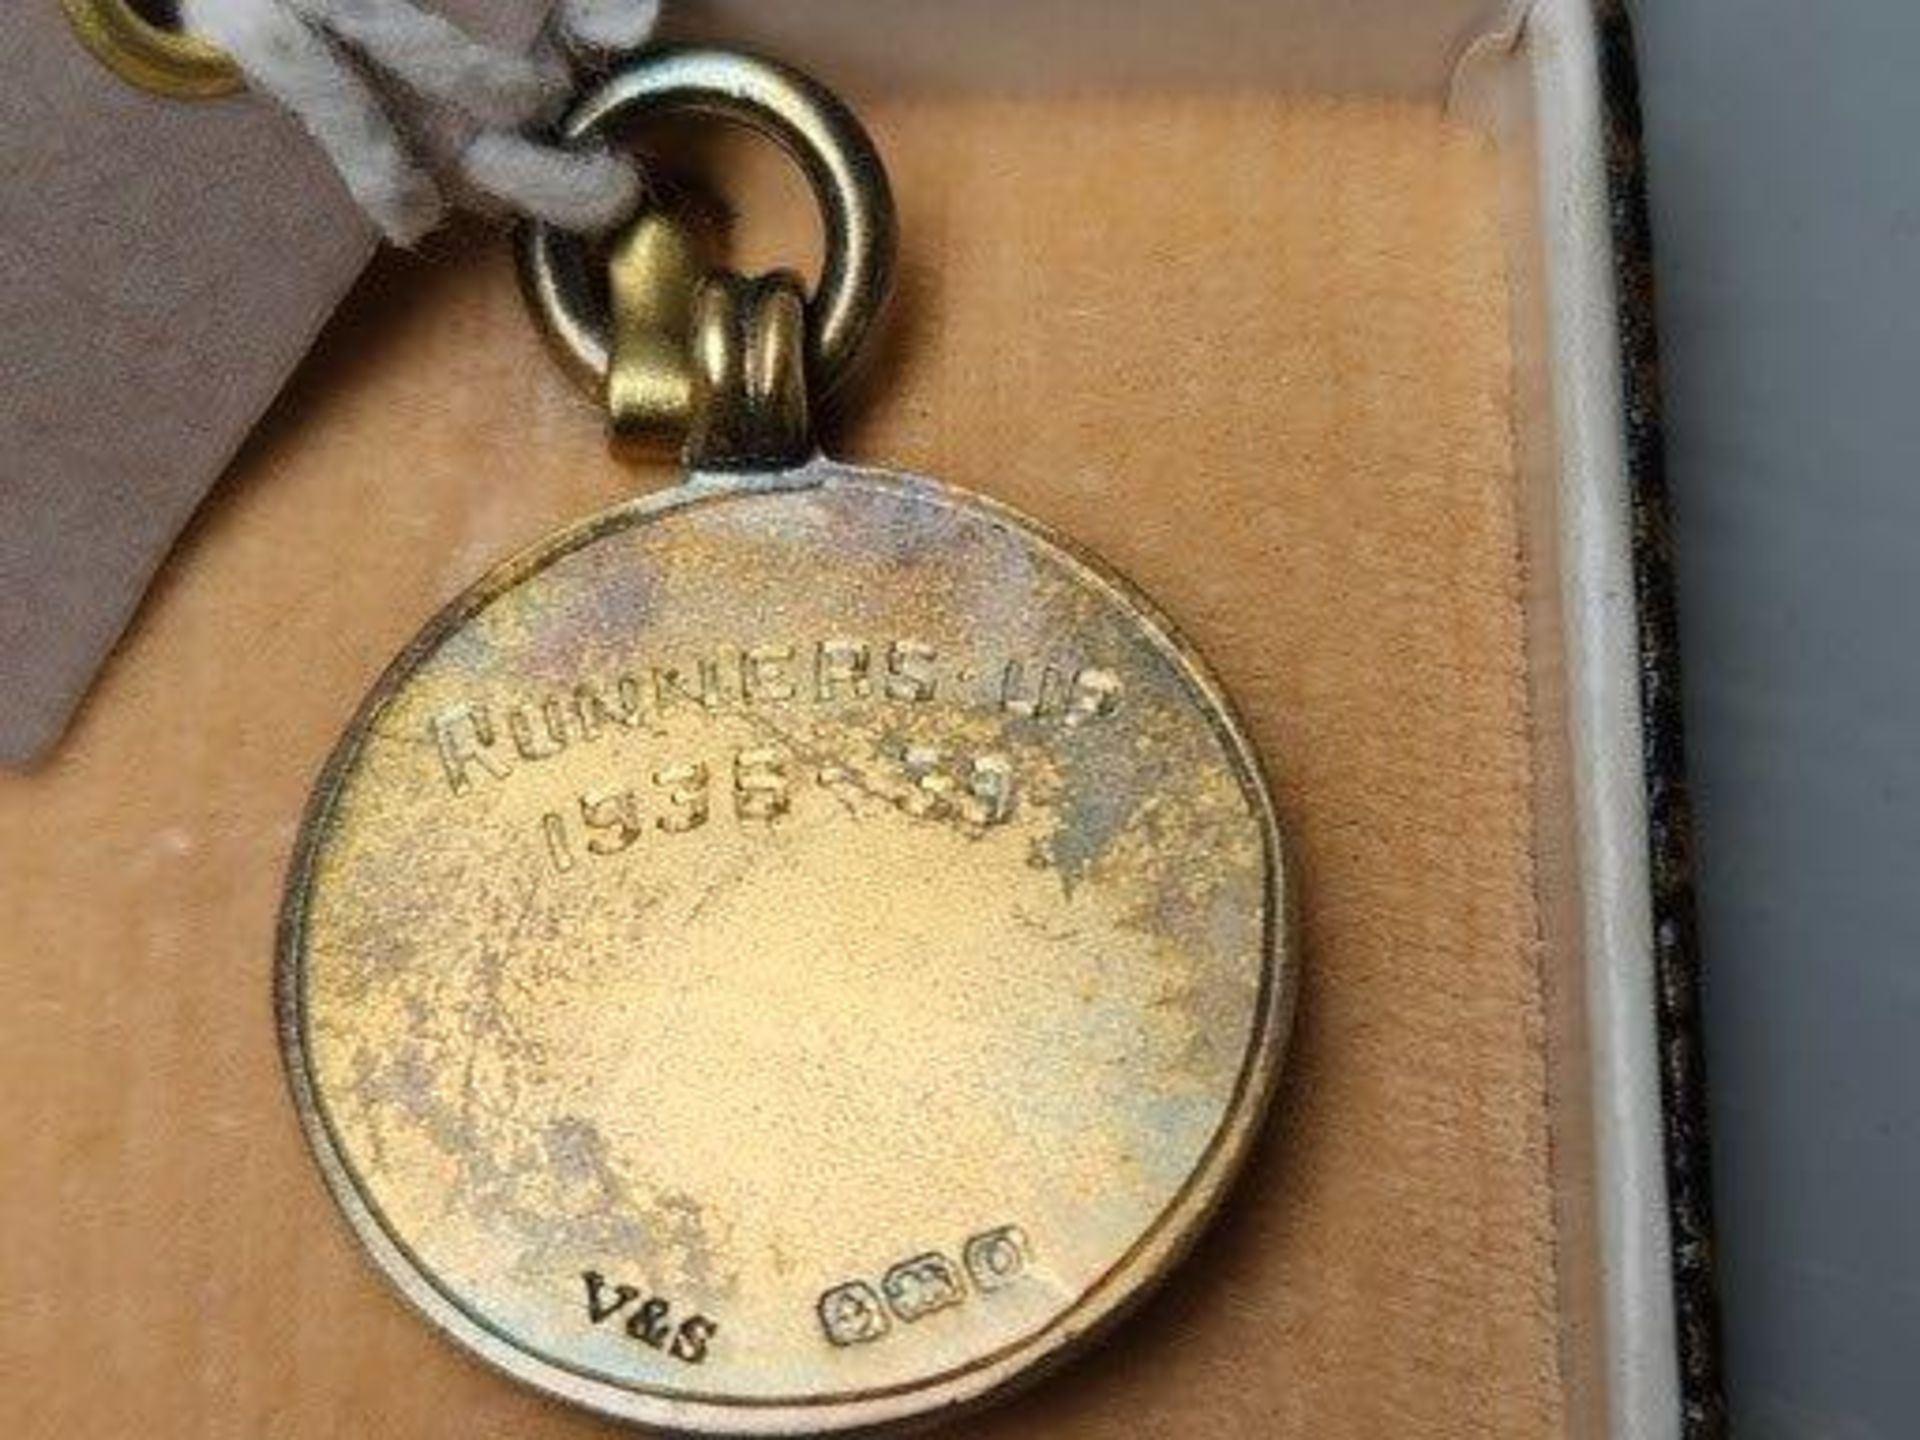 'Silver Runners Limited' 1938-1939 Northumbria Combination Football League Medal (Birmingham) - Image 3 of 3